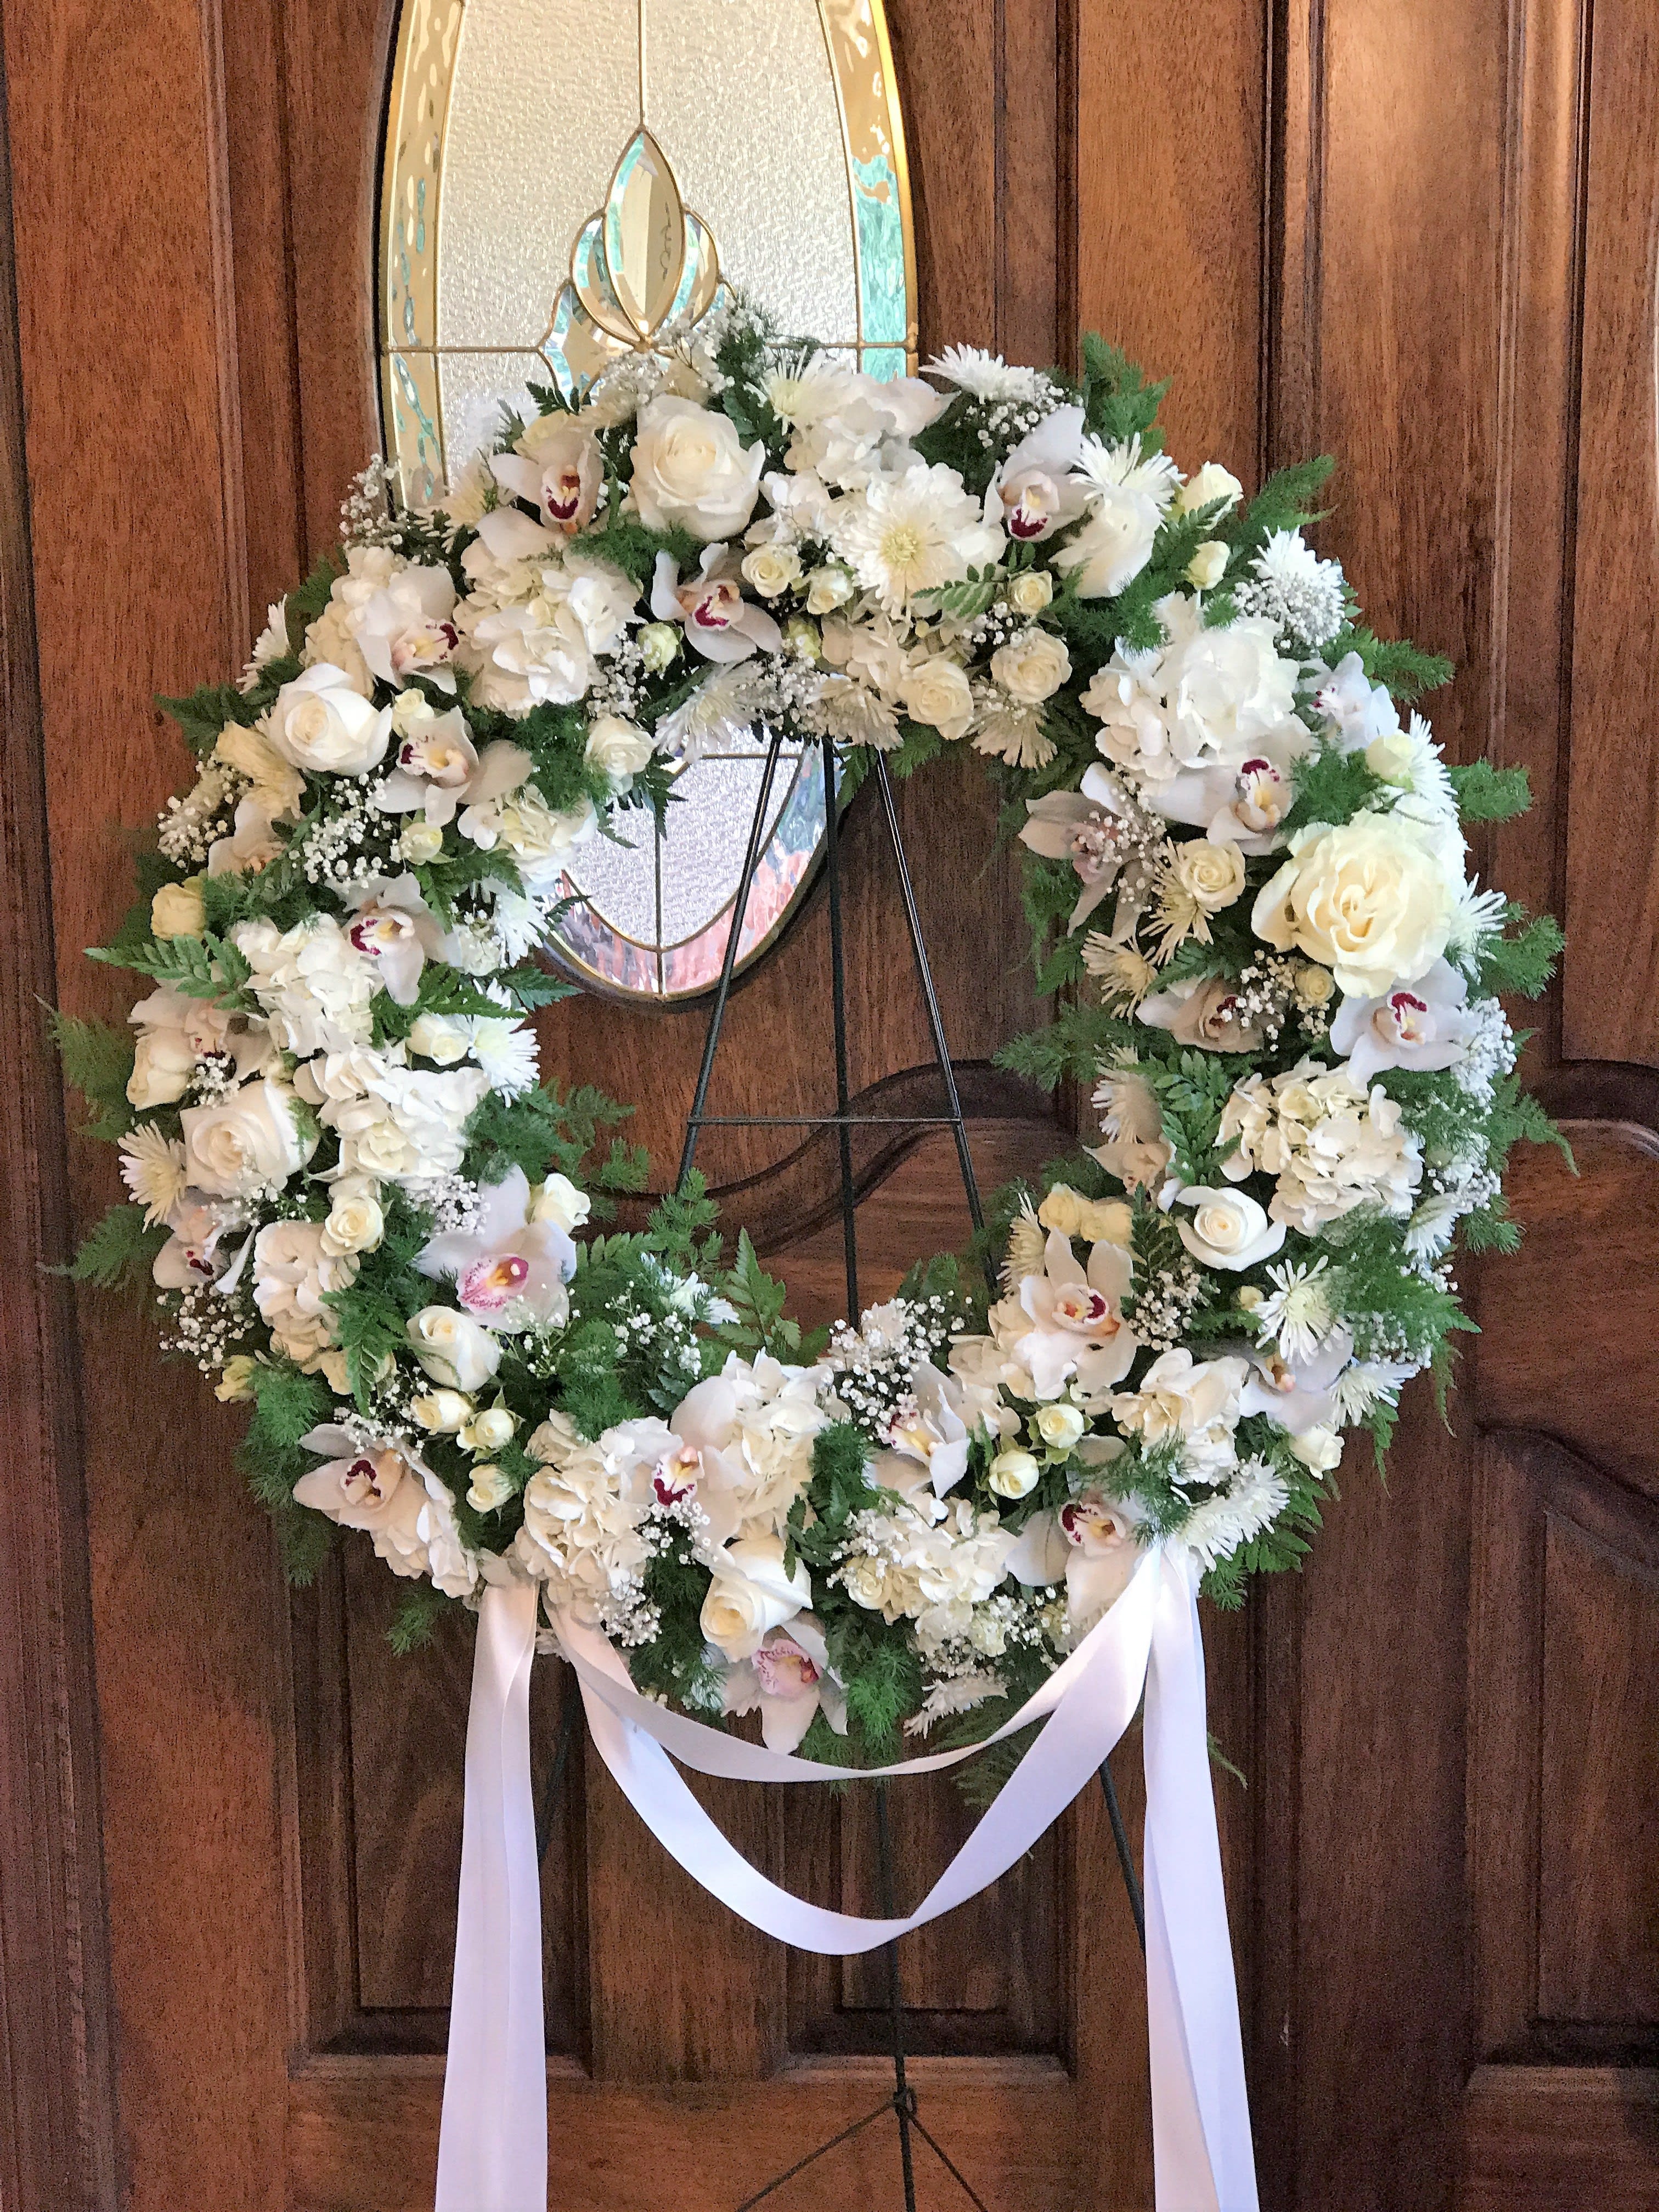 Peaceful Dreams Wreath - A beautiful wreath in whites &amp; soft pastel colors.